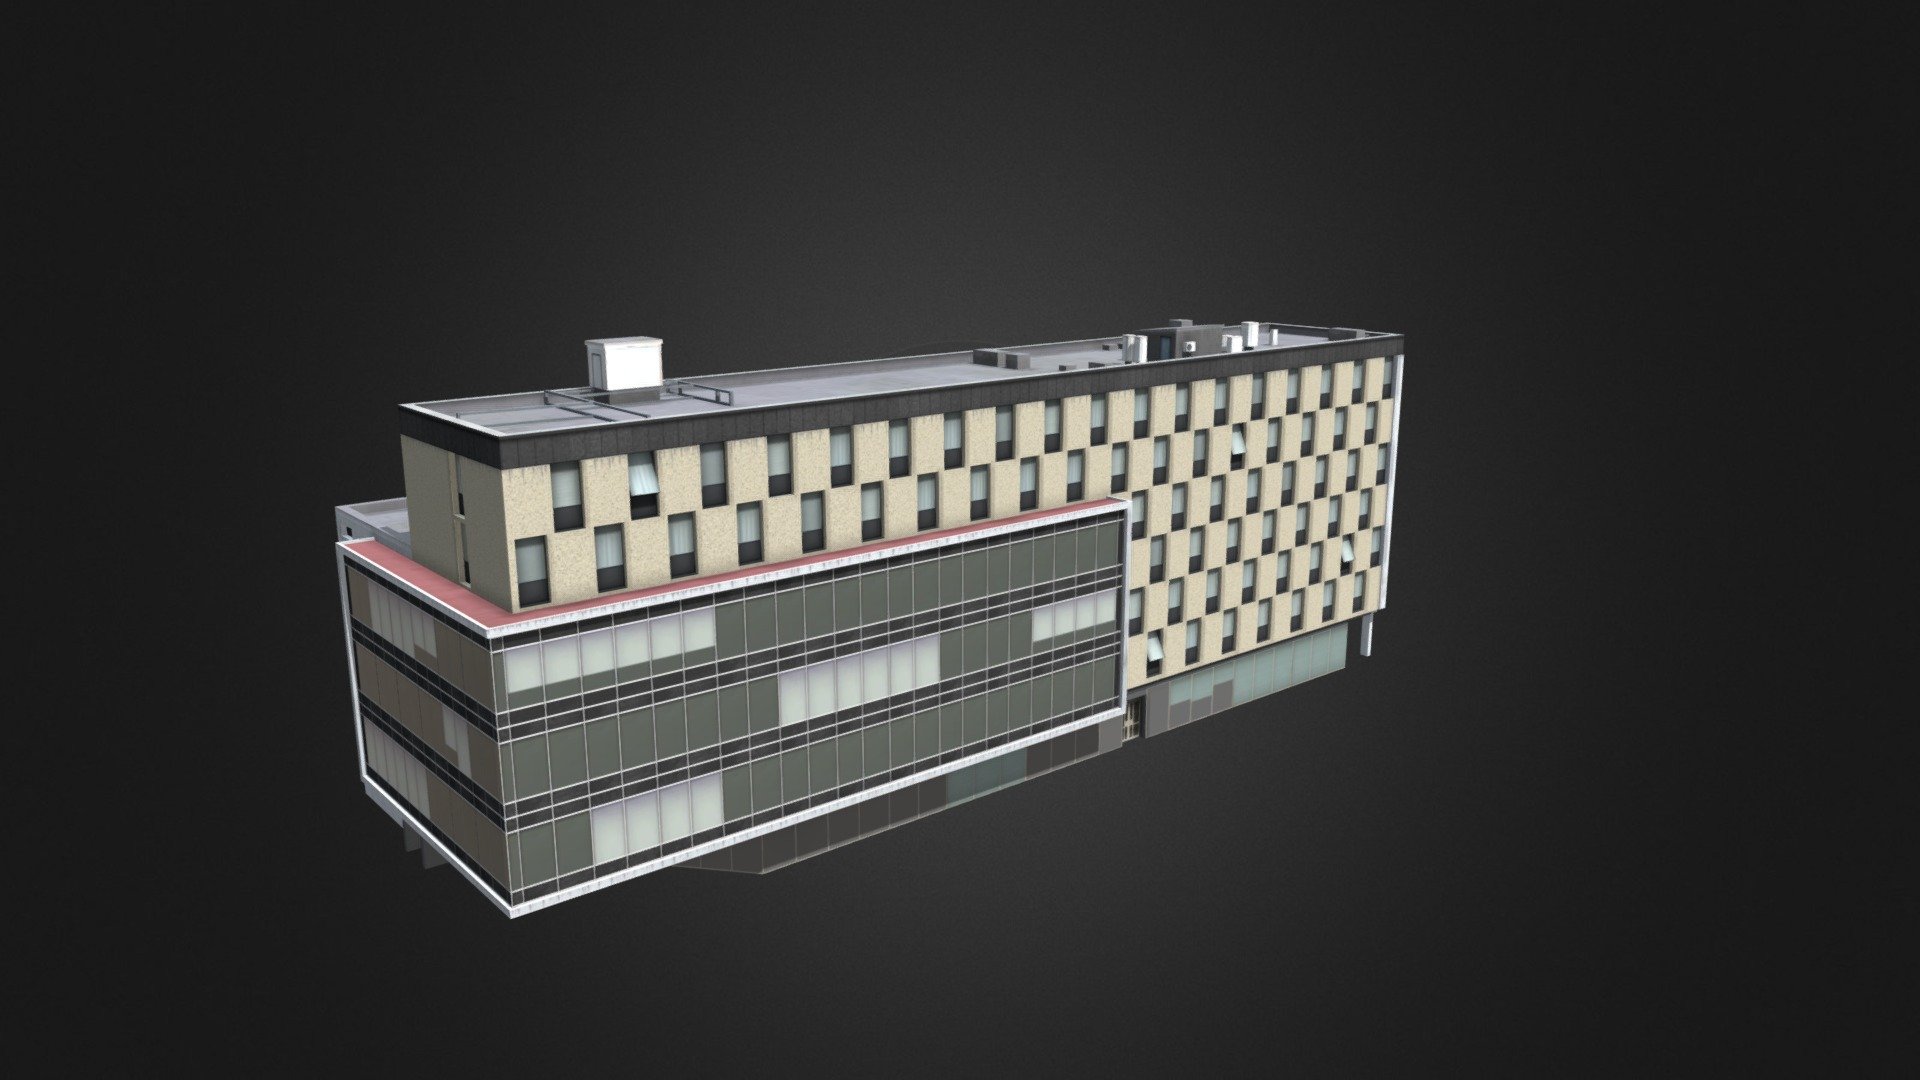 Low poly 3d model.
Modern building from Katowice, Poland 3d model